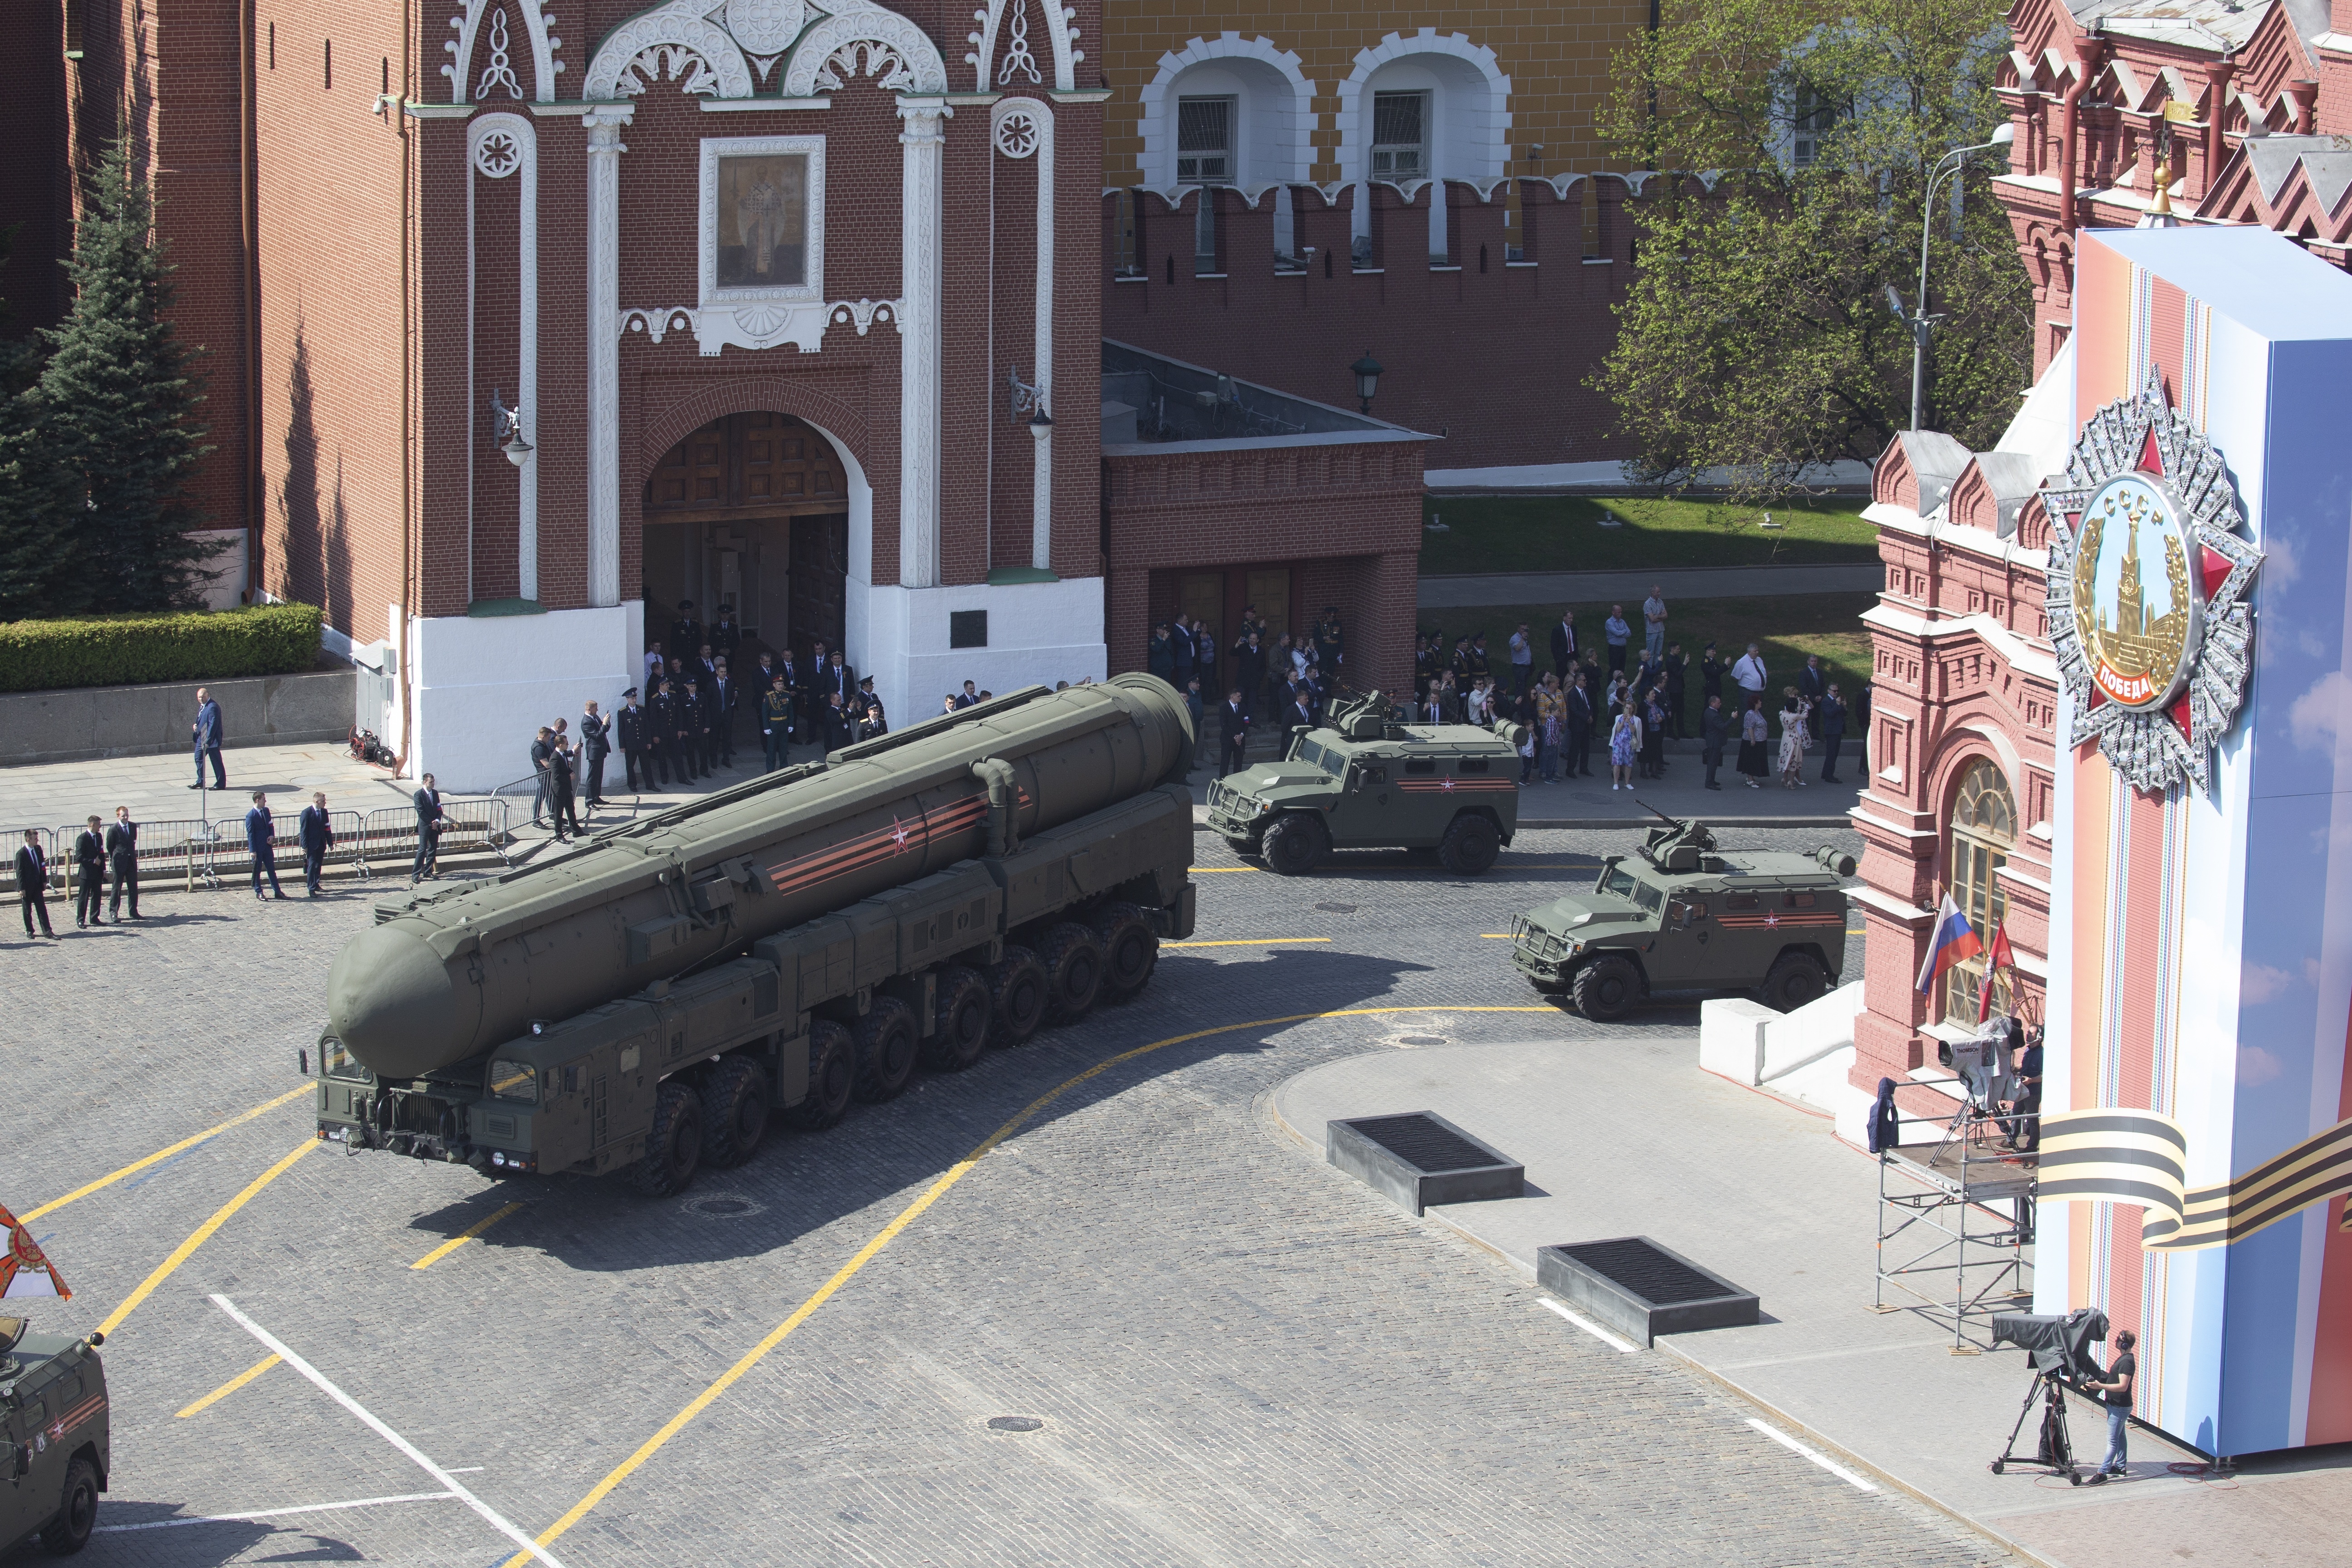 A Russian military Topol M intercontinental ballistic missile launcher roll down Red Square during a rehearsal for the Victory Day military parade in Moscow, Russia, Tuesday, May 7, 2019 . The parade will take place at Moscow's Red Square on May 9 to celebrate 74 years of the victory in WWII. (AP Photo/Alexander Zemlianichenko, Pool)